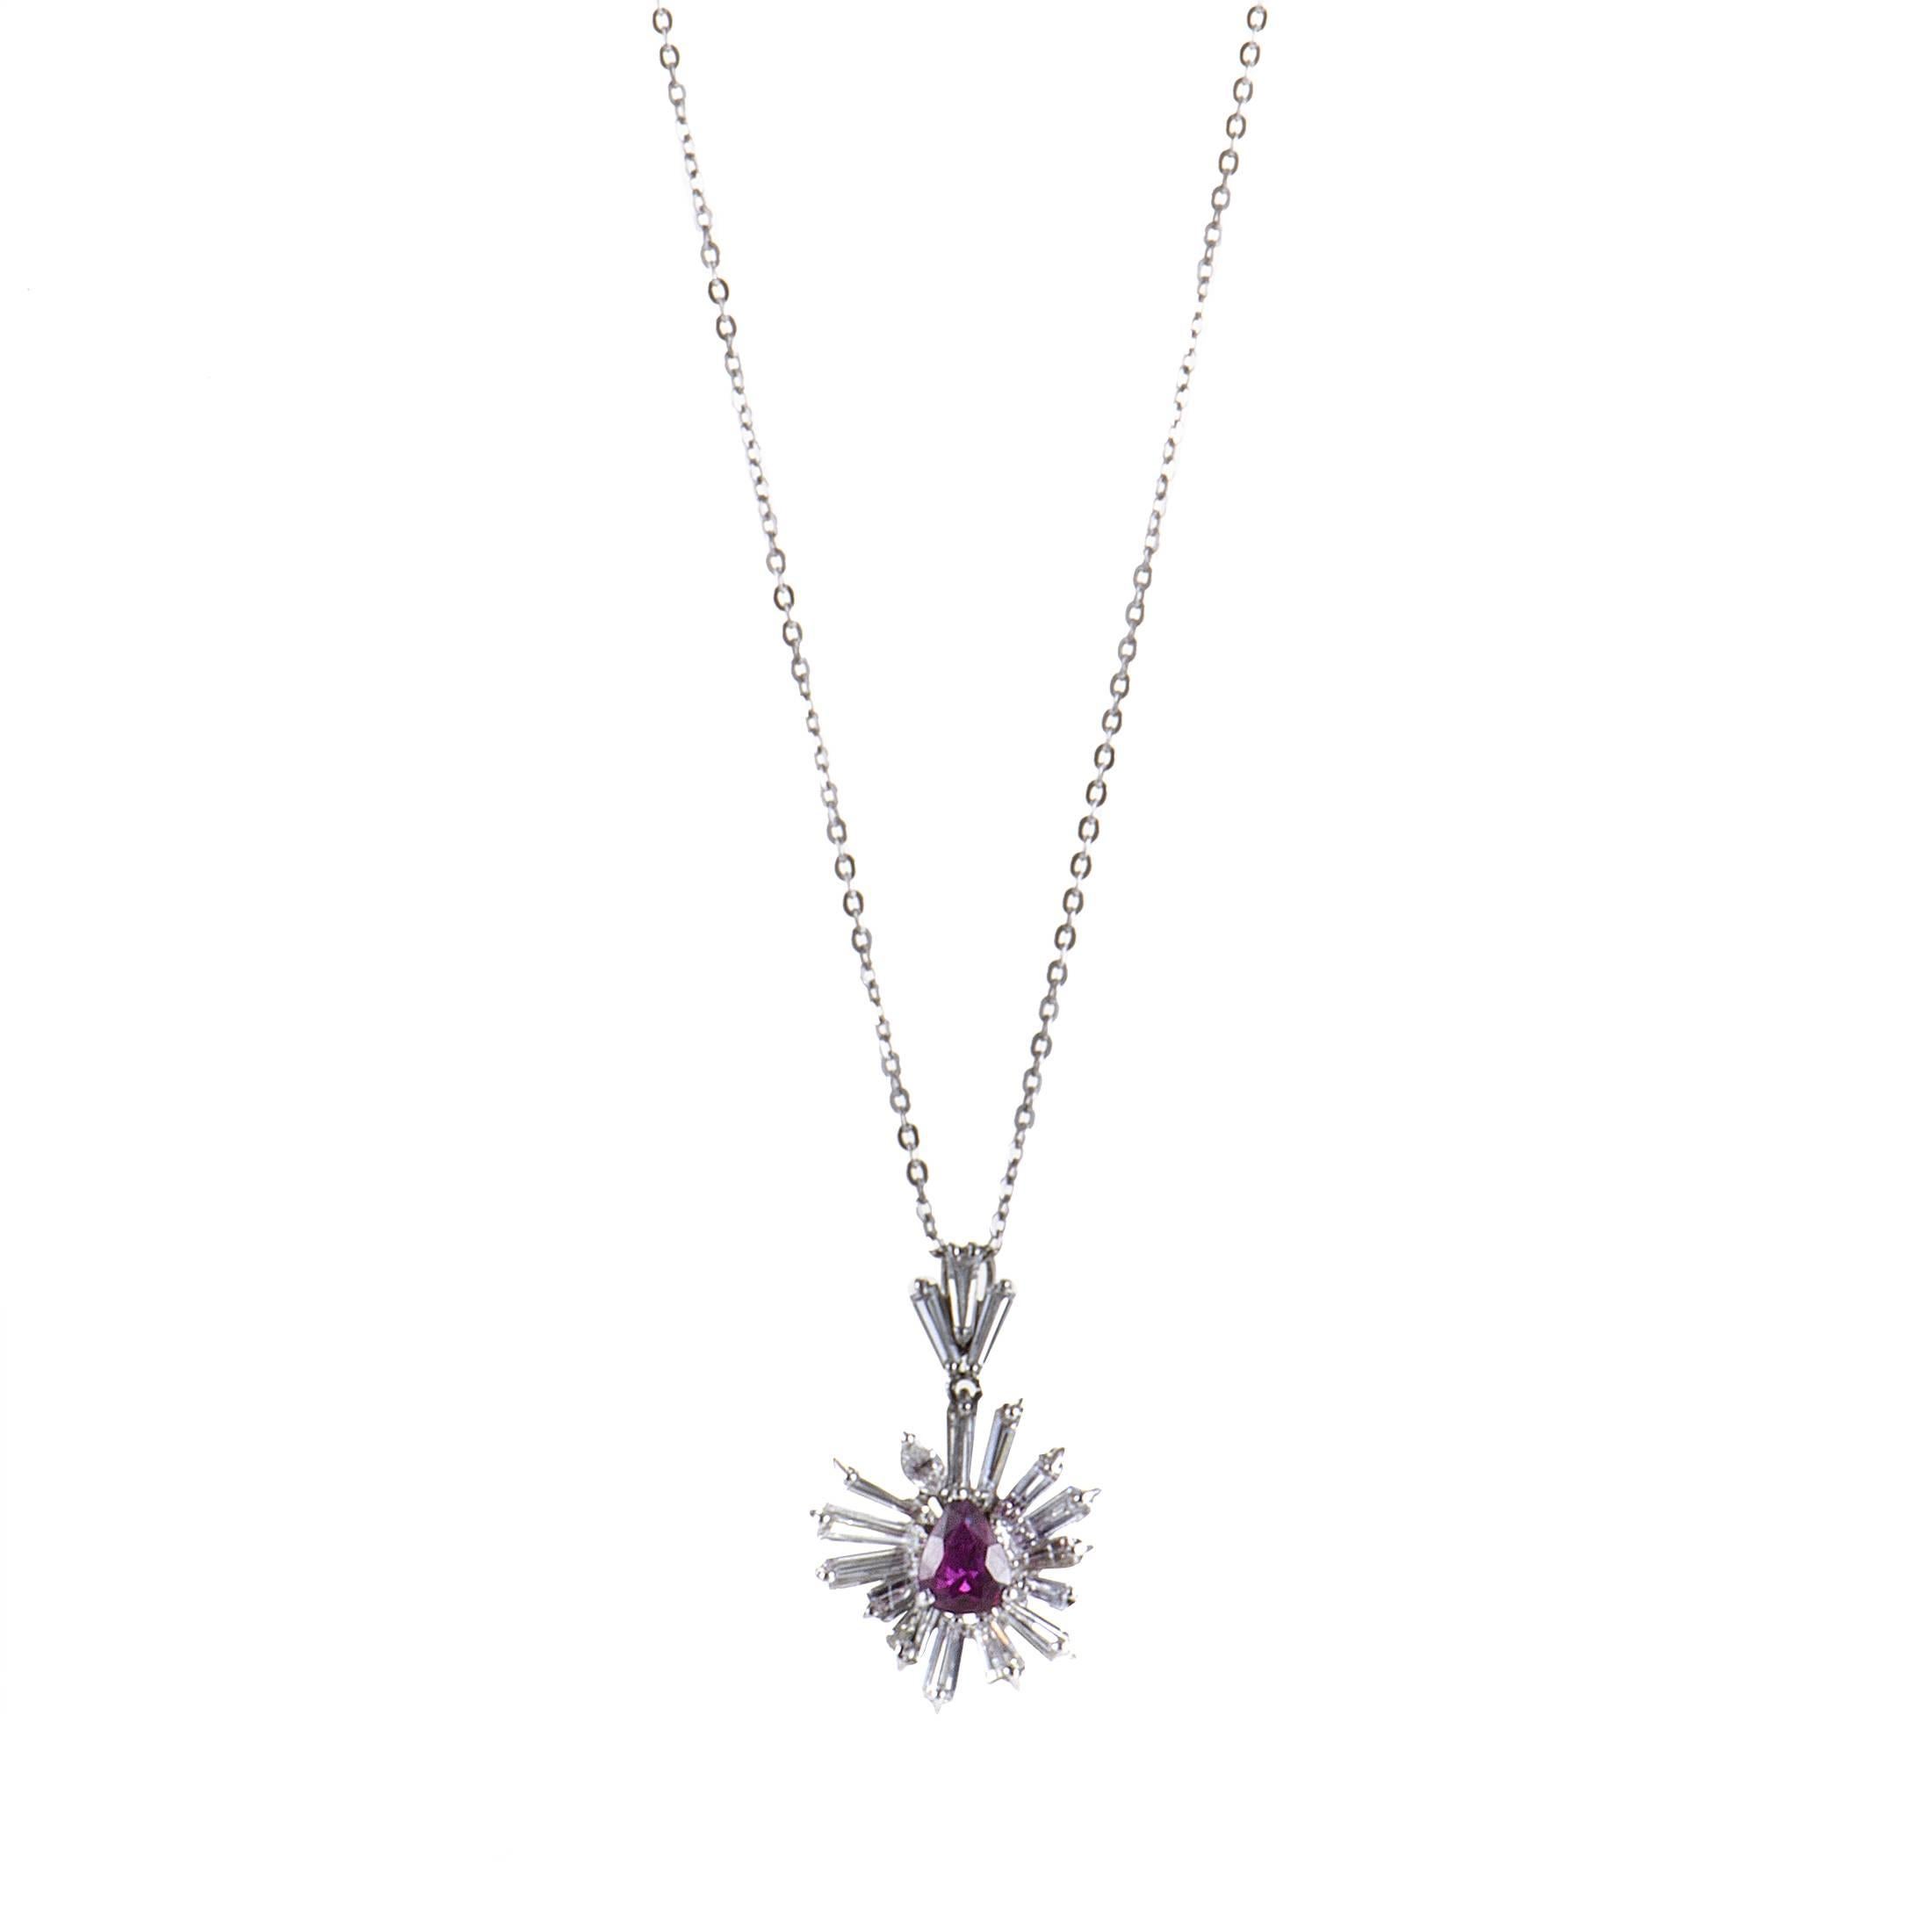 At the same time gracefully elegant and incredibly attractive, this gorgeous necklace offers an appearance of utmost style and class. The necklace is made of 18K white gold and boasts a pendant decorated with 3.15ct of diamonds and a stunning 1.35ct